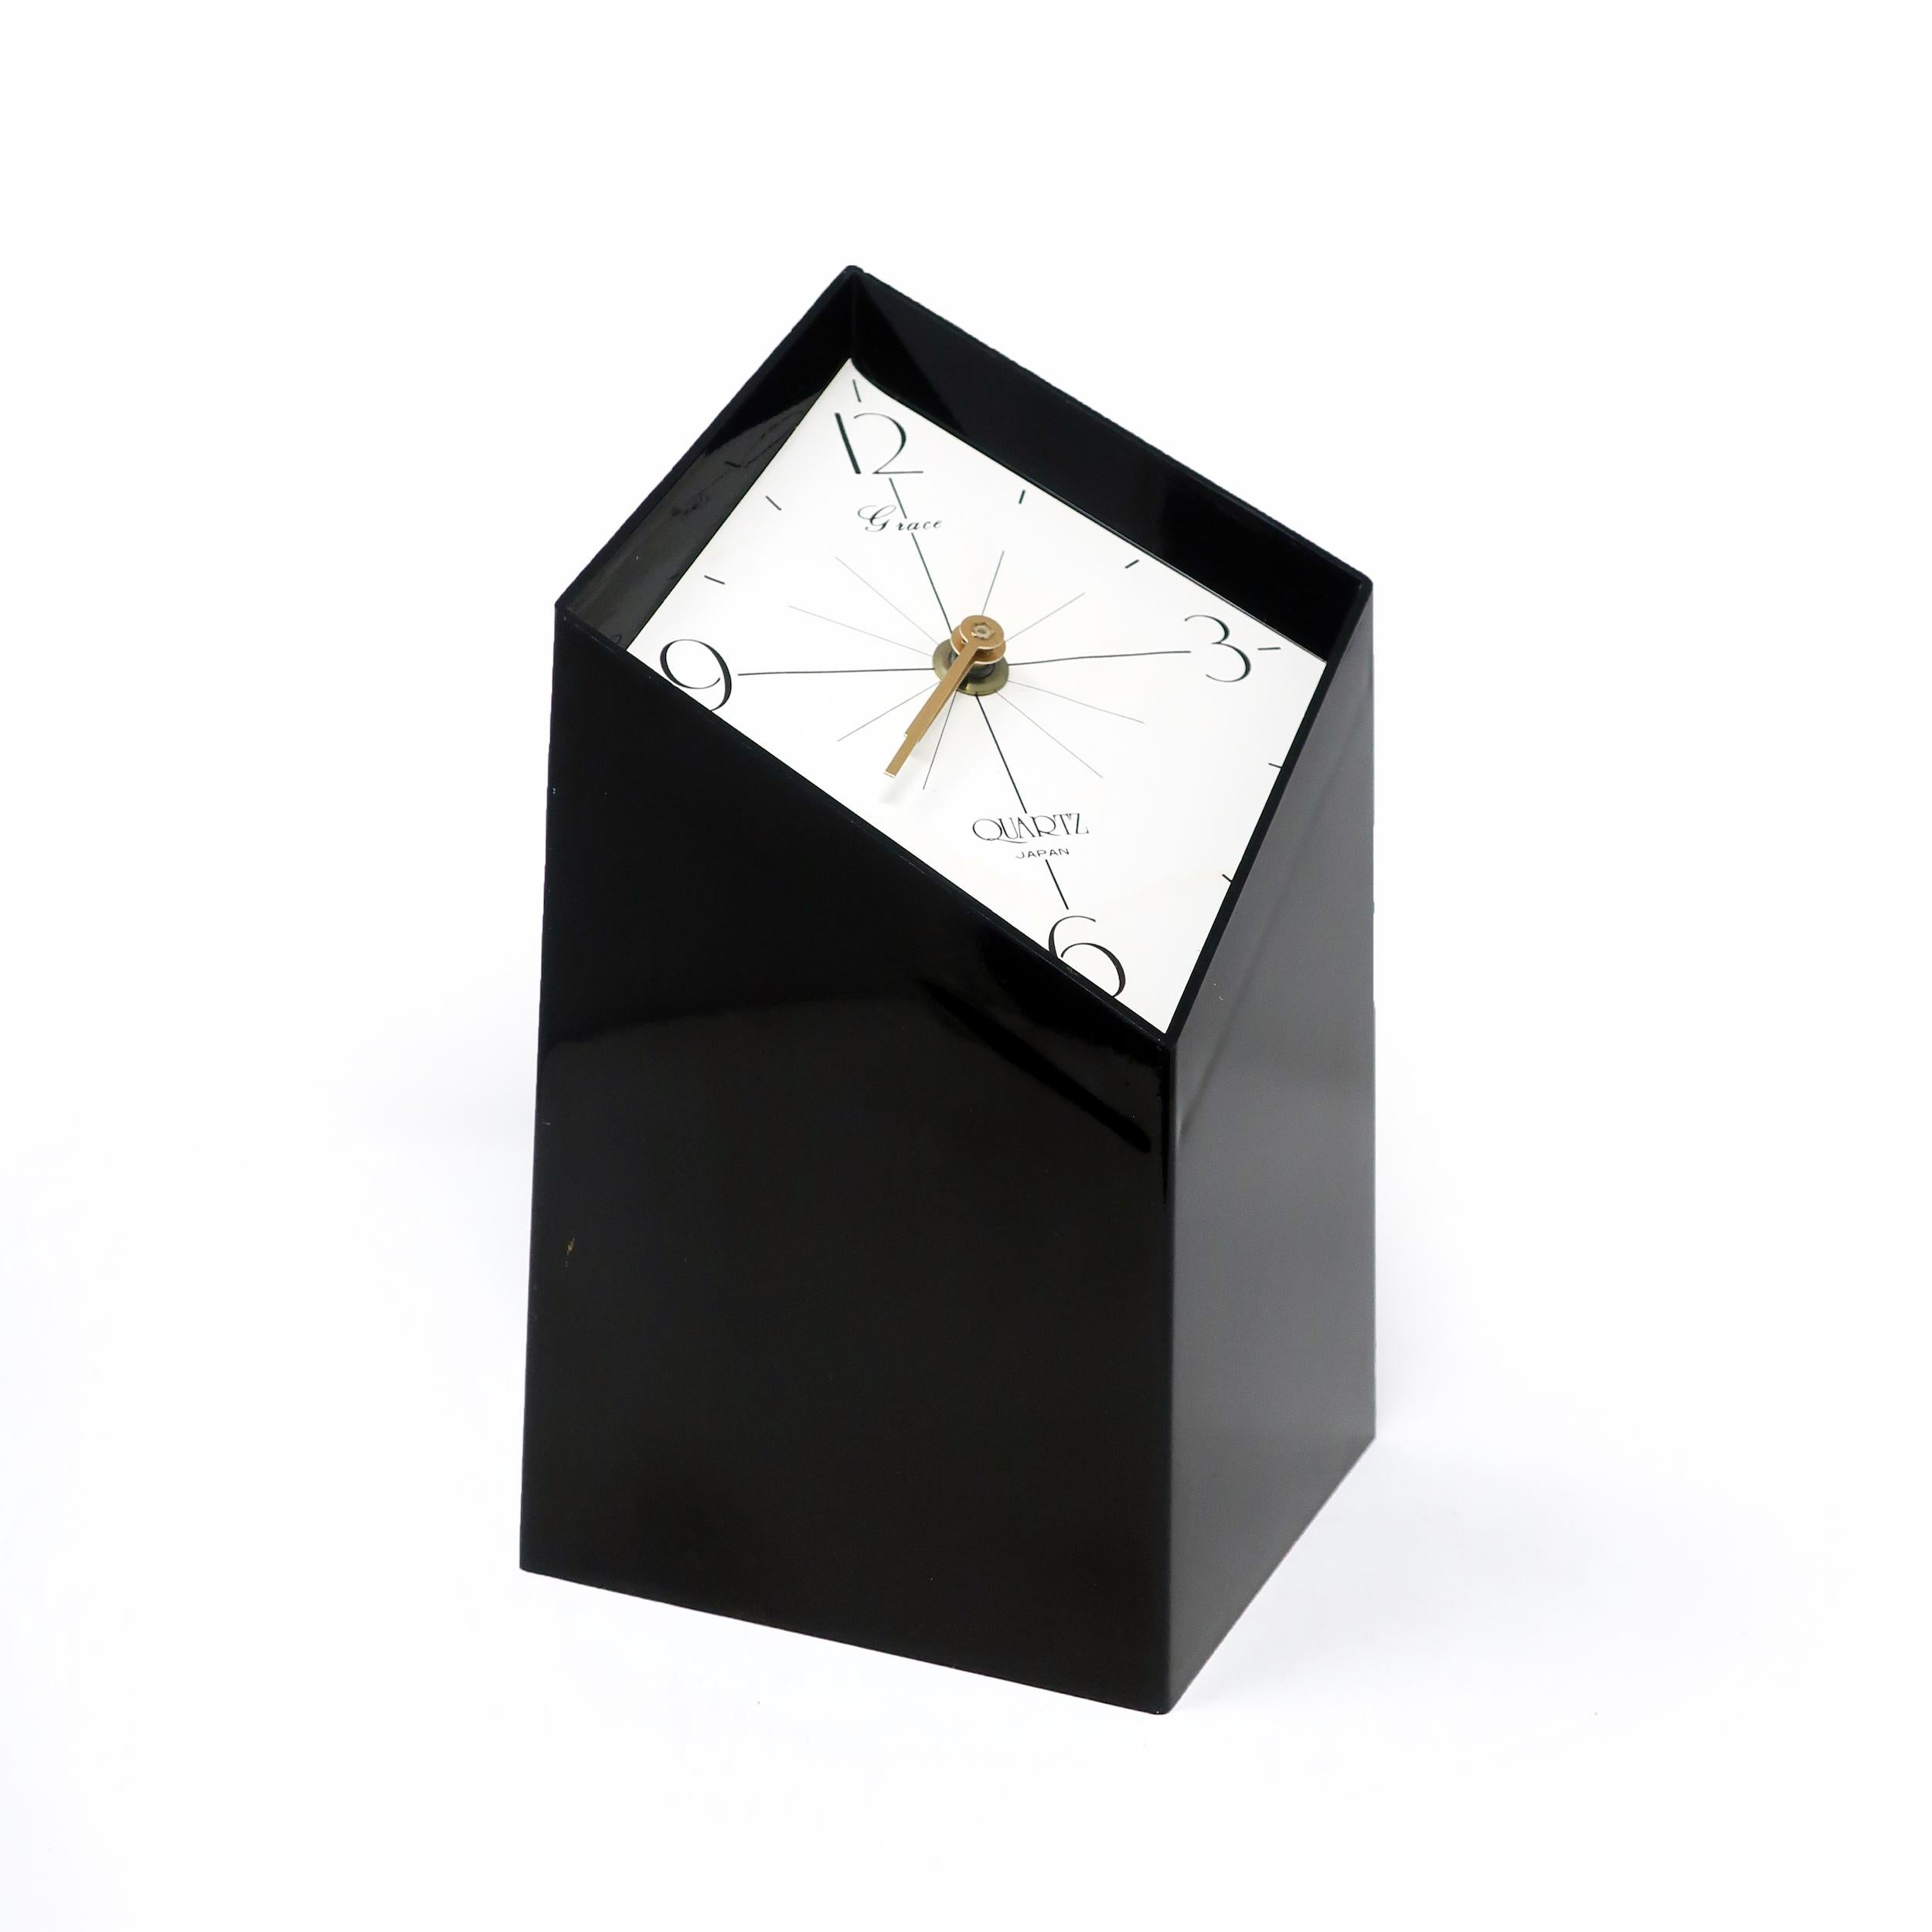 An amazing vintage black desk or table clock with a black plastic body and a white face made by Grace, a Japanese company. Diamond shaped with a diagonal face, giving it a fantastic three dimensionality. The clock's movement is inset inside of the